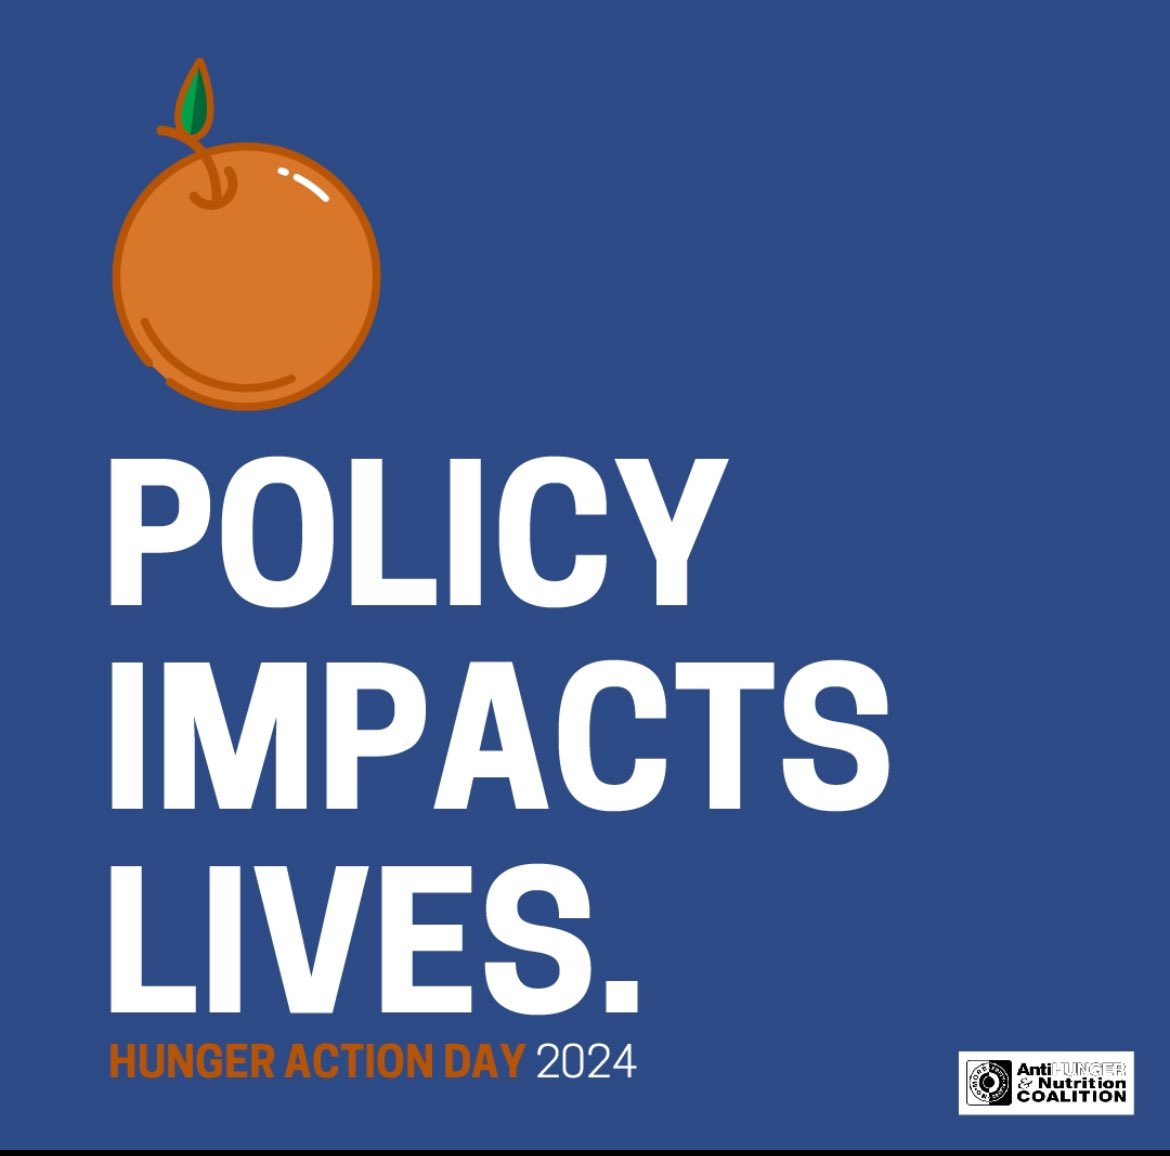 see you tomorrow in Olympia for #HungerActionDay! We are looking forward to speaking with our lawmakers about anti-hunger and anti-poverty priorities! #HAD2024 #WALeg